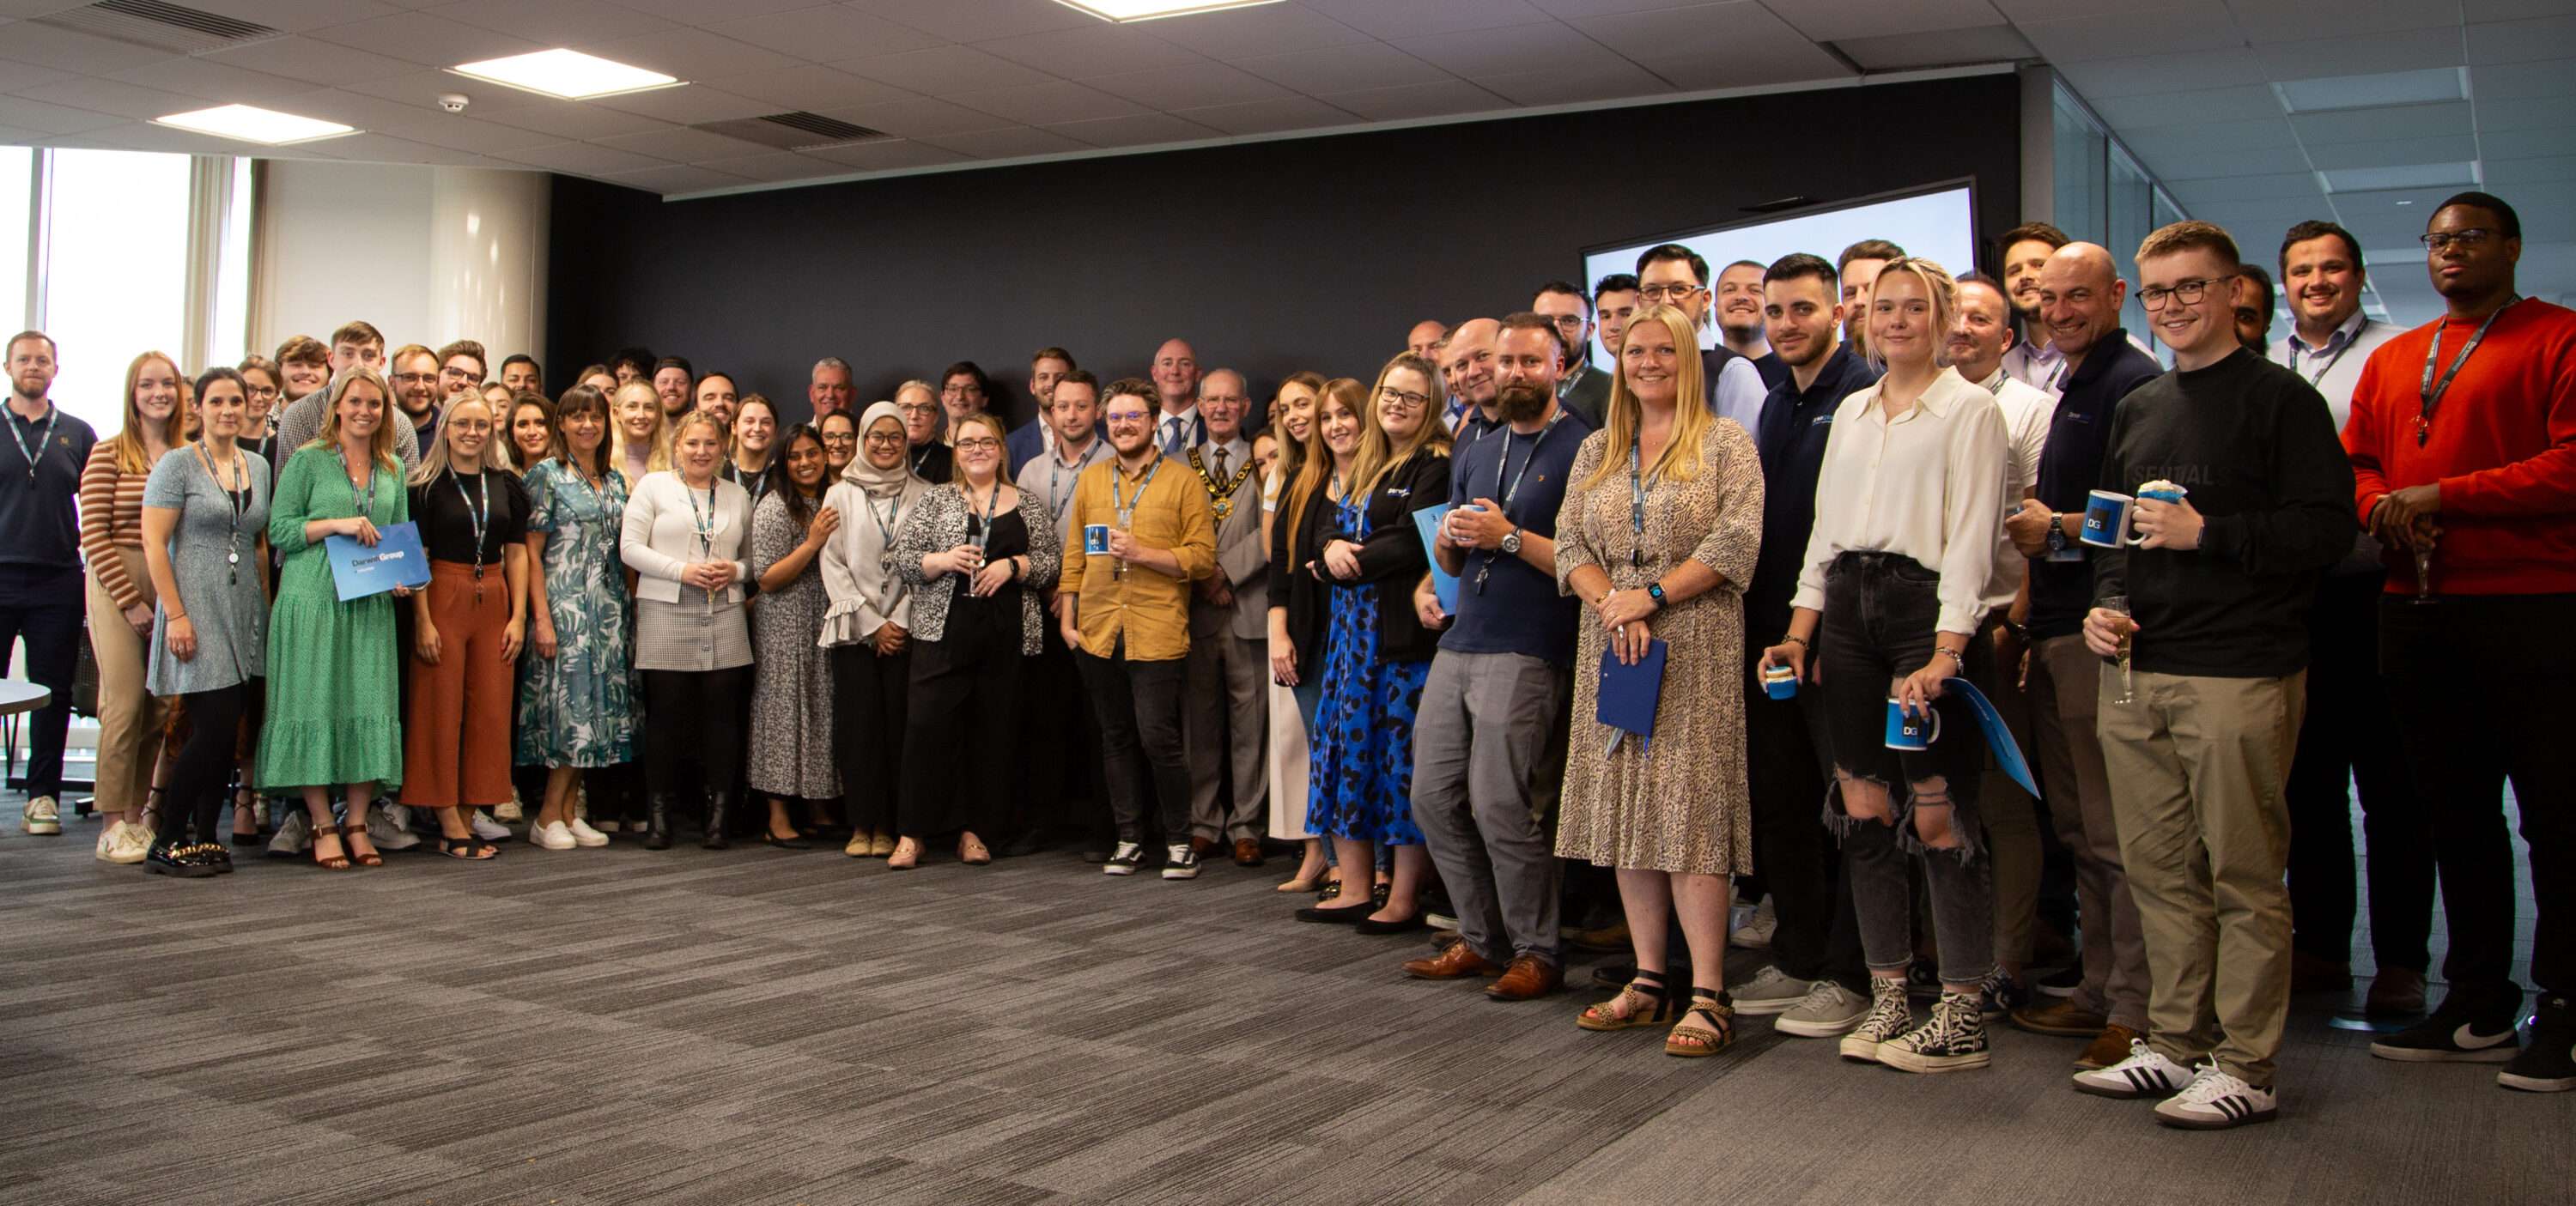 The Darwin Group HQ team, gathered for a group photo after the opening ceremony for our new office in Telford.